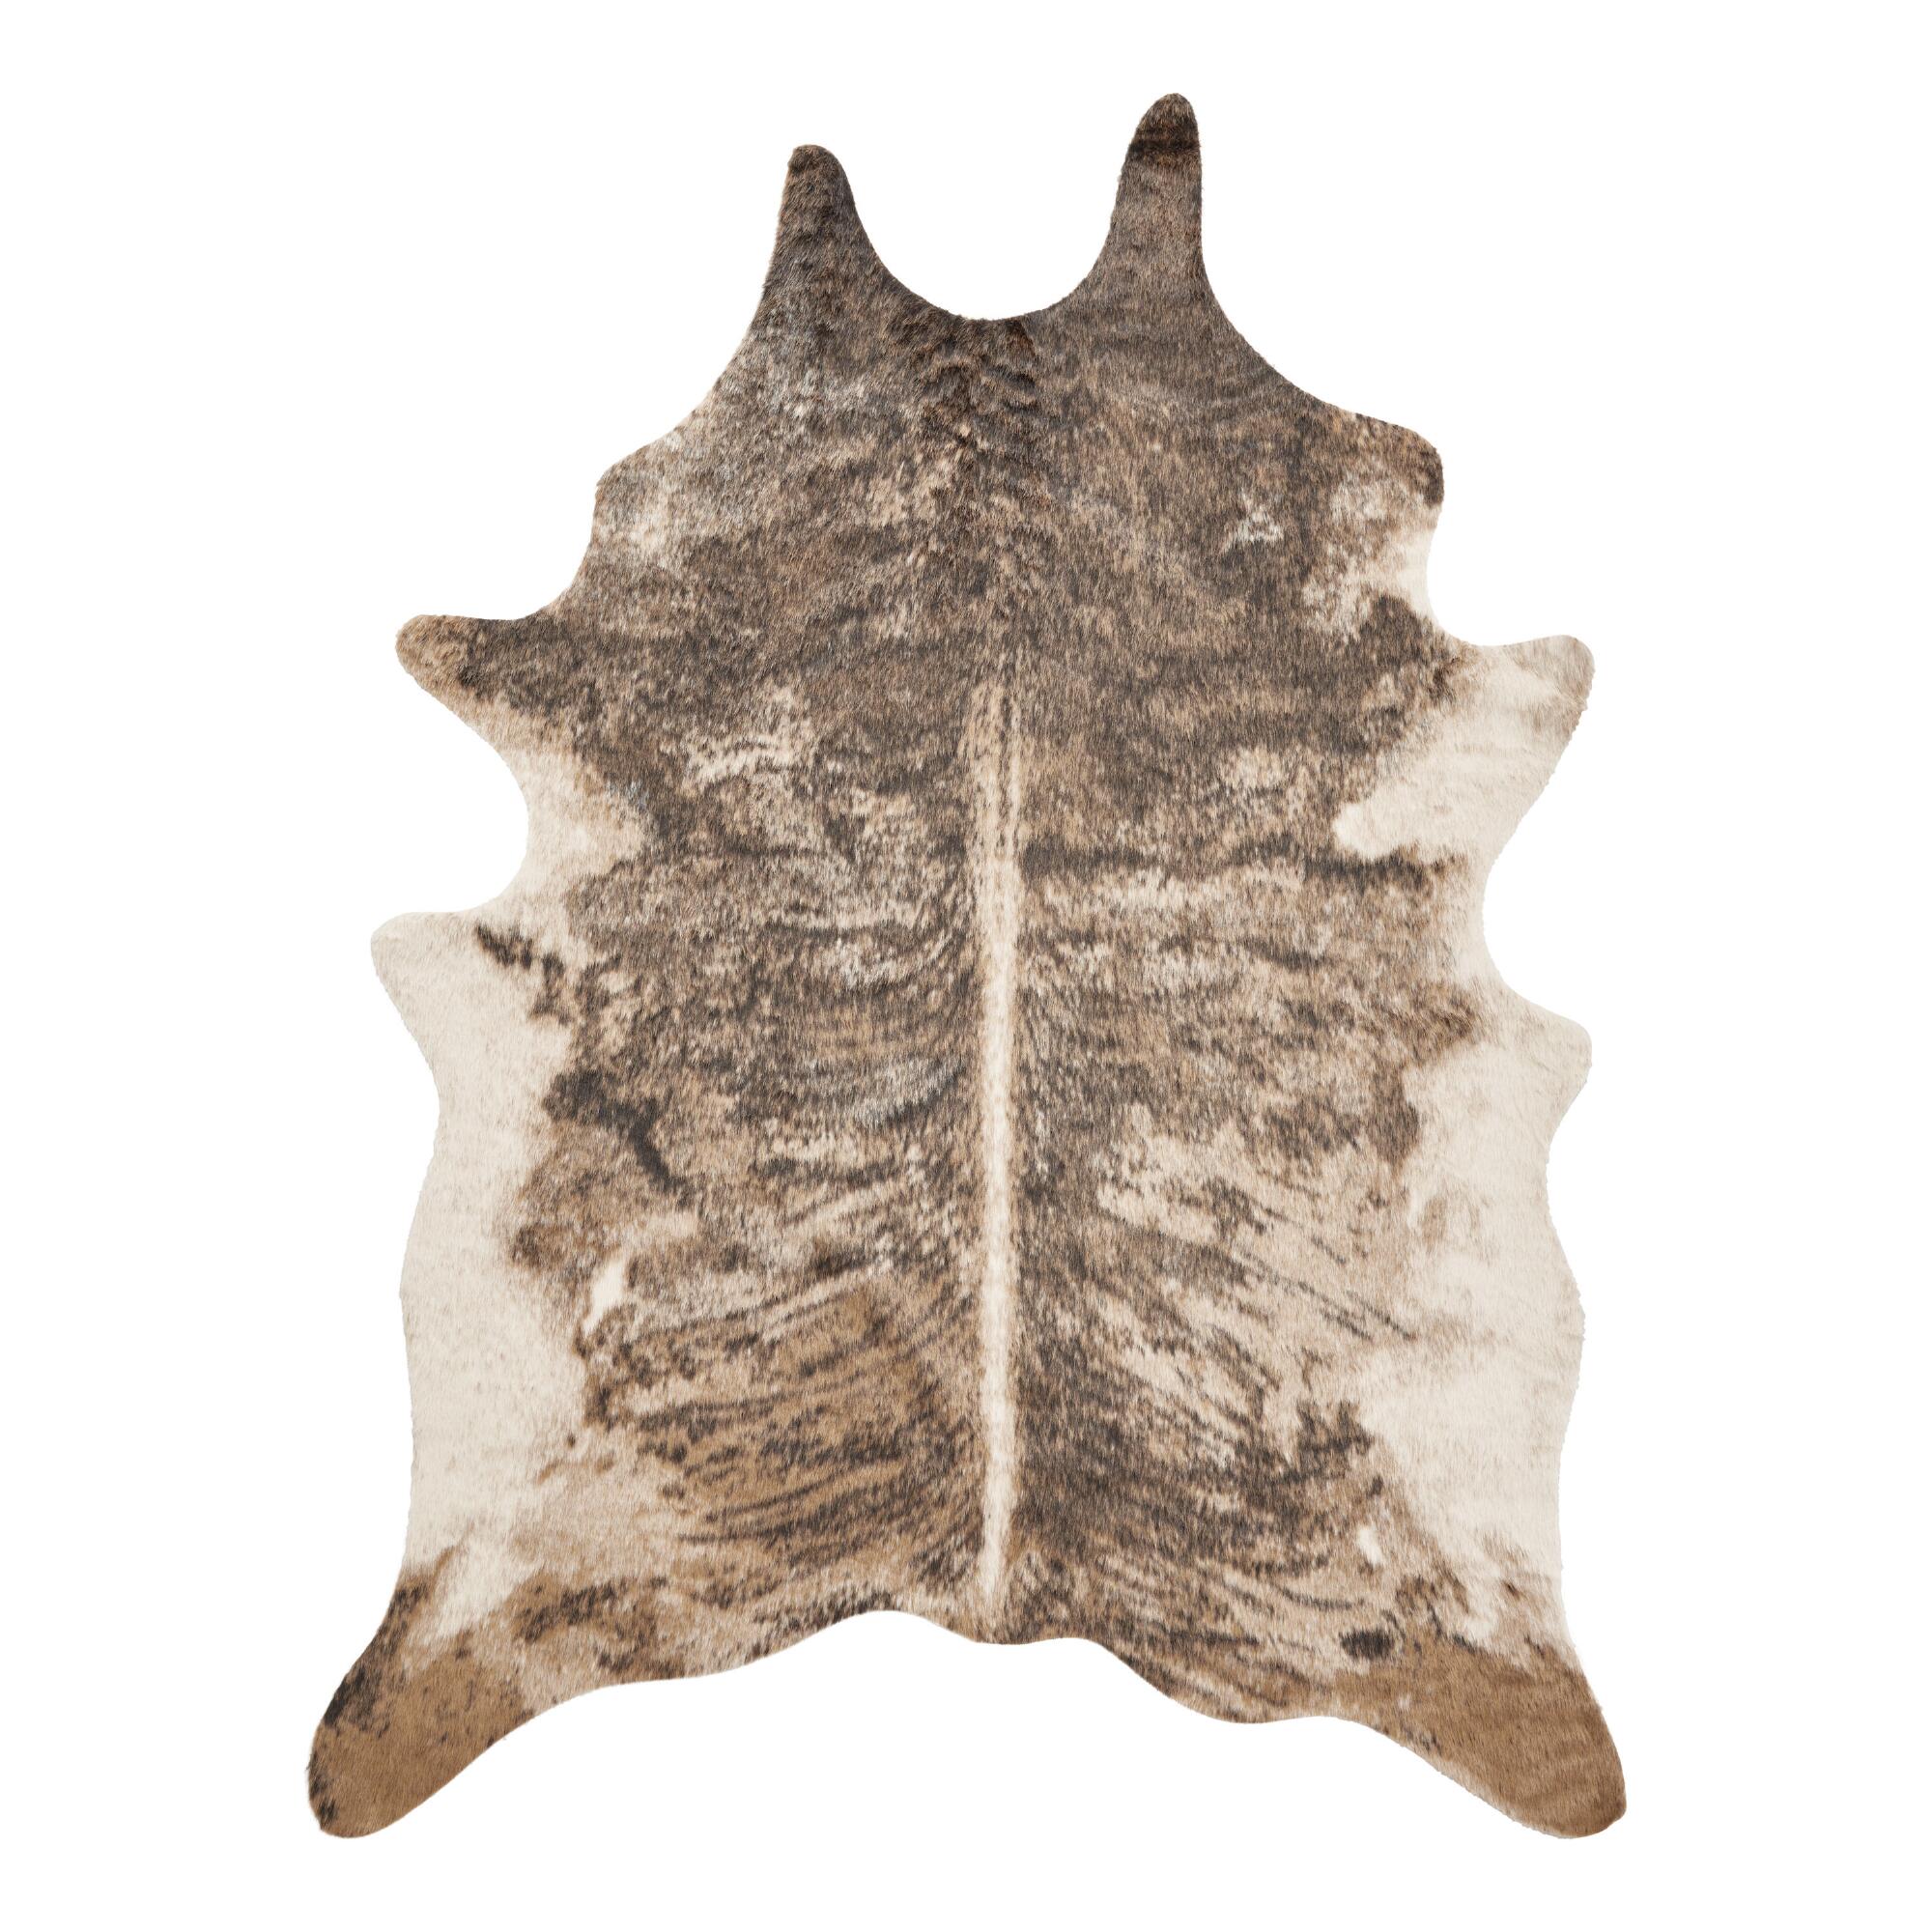 Dark Brindle Printed Faux Cowhide Area Rug: Natural - Polyester - 5' x 7' by World Market